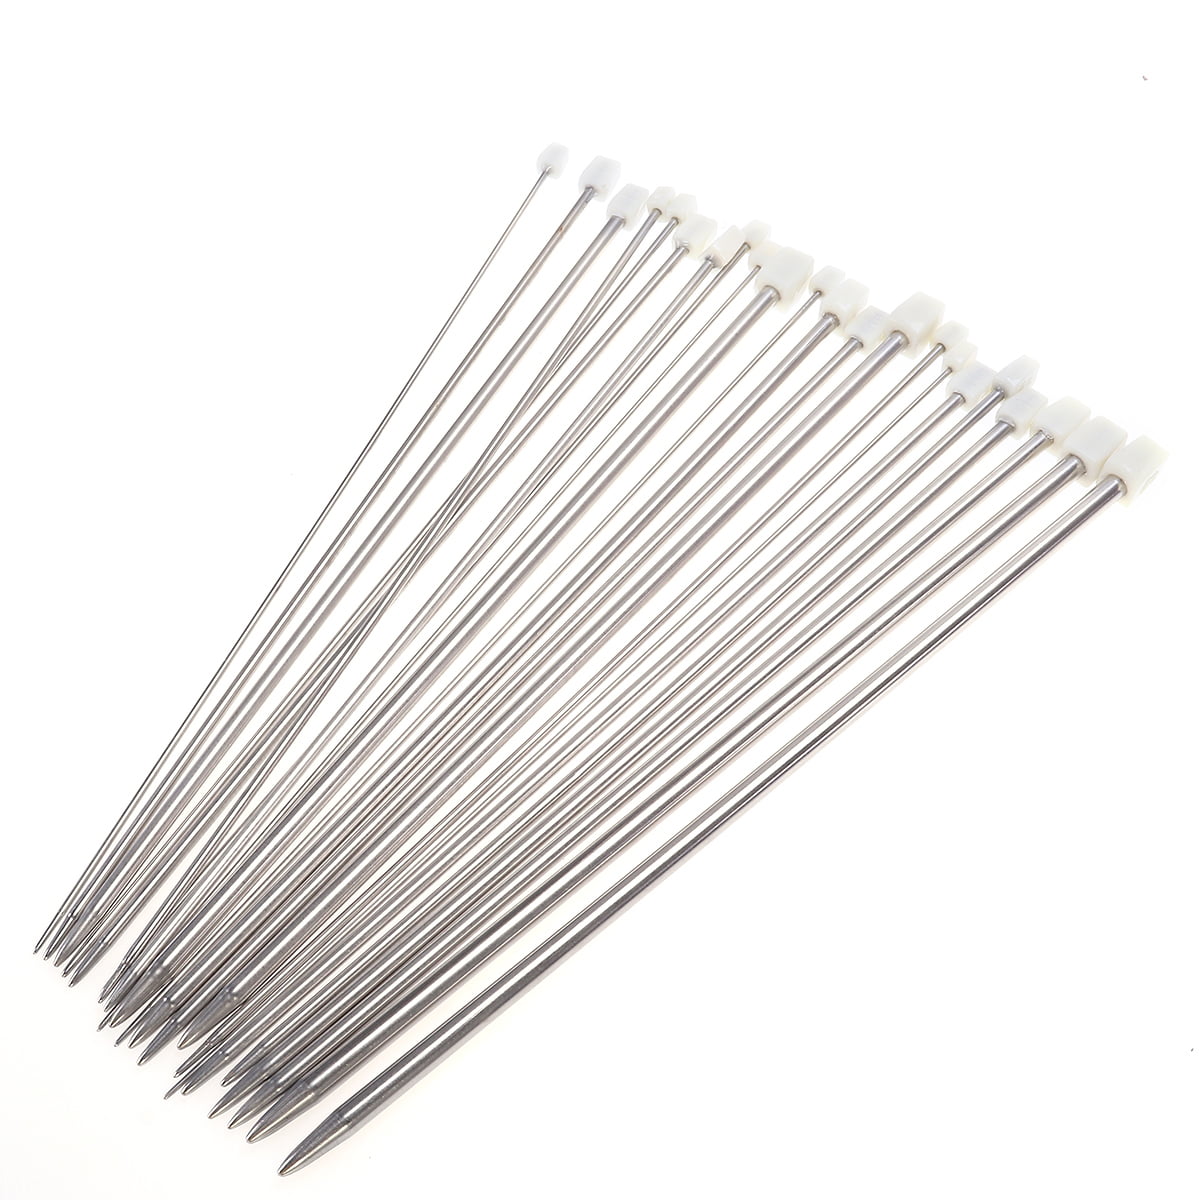 36cm Stainless Steel Single Pointed Knitting Needles Kit Set in Case 2.0mm 2.5mm 3.0mm 3.5mm 4.0mm 4.5mm 5.0mm 5.5mm 6.0mm 7.0mm 8.0mm 11 Pairs of 14